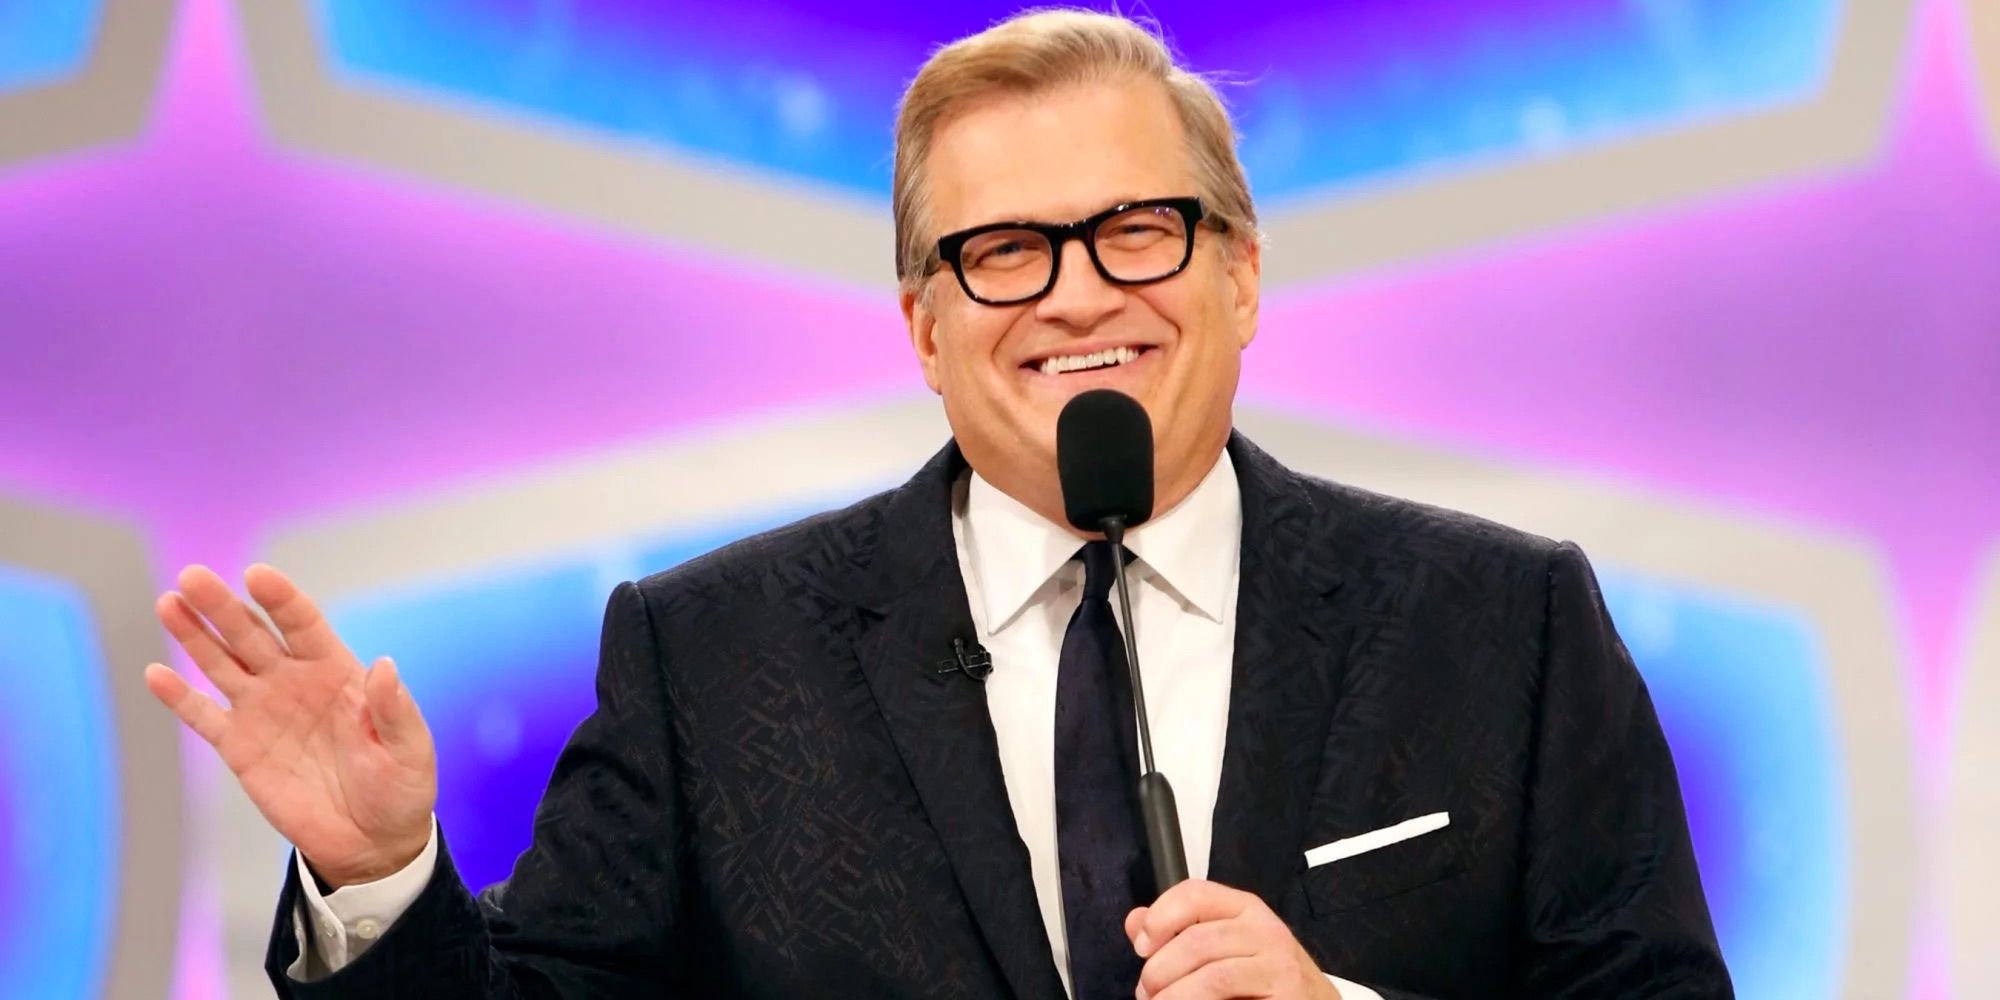 Drew Carey smiles while hosting The Price Is Right.